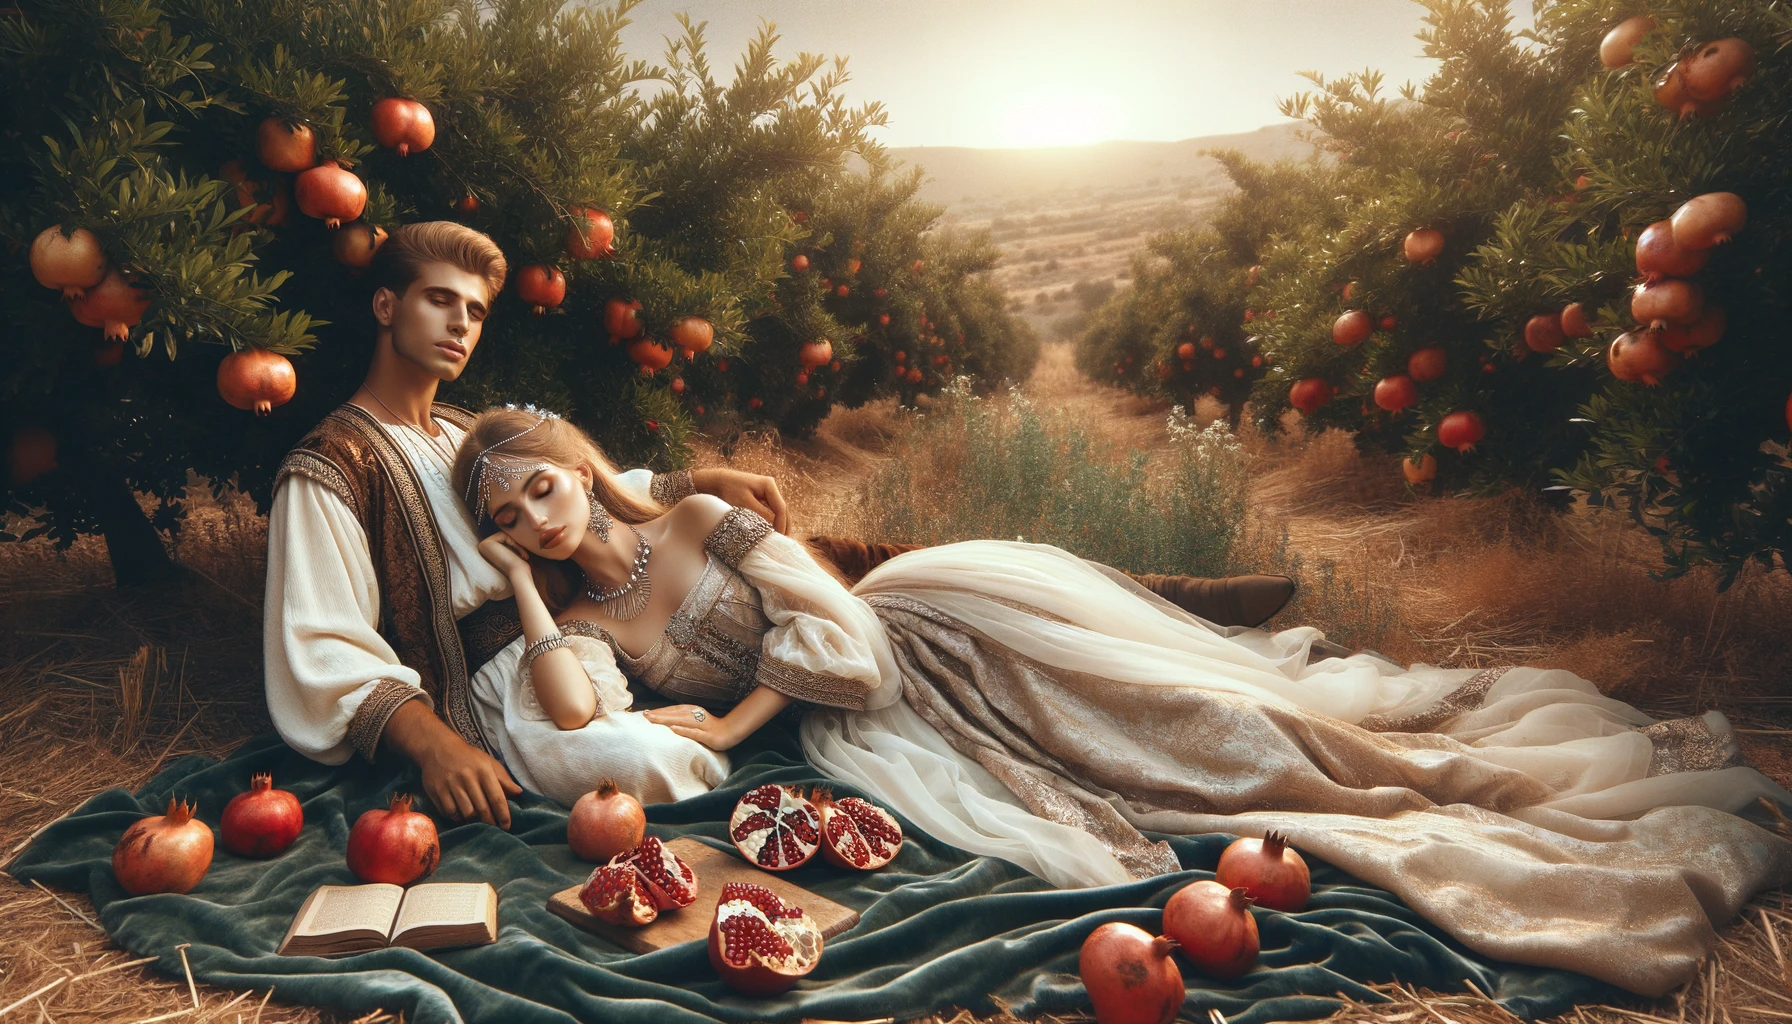 Ark.au Illustrated Bible - Song of Solomon 7:12 - Let us get up early to the vineyards; let us see if the vine flourish, whether the tender grape appear, and the pomegranates bud forth: there will I give thee my loves.